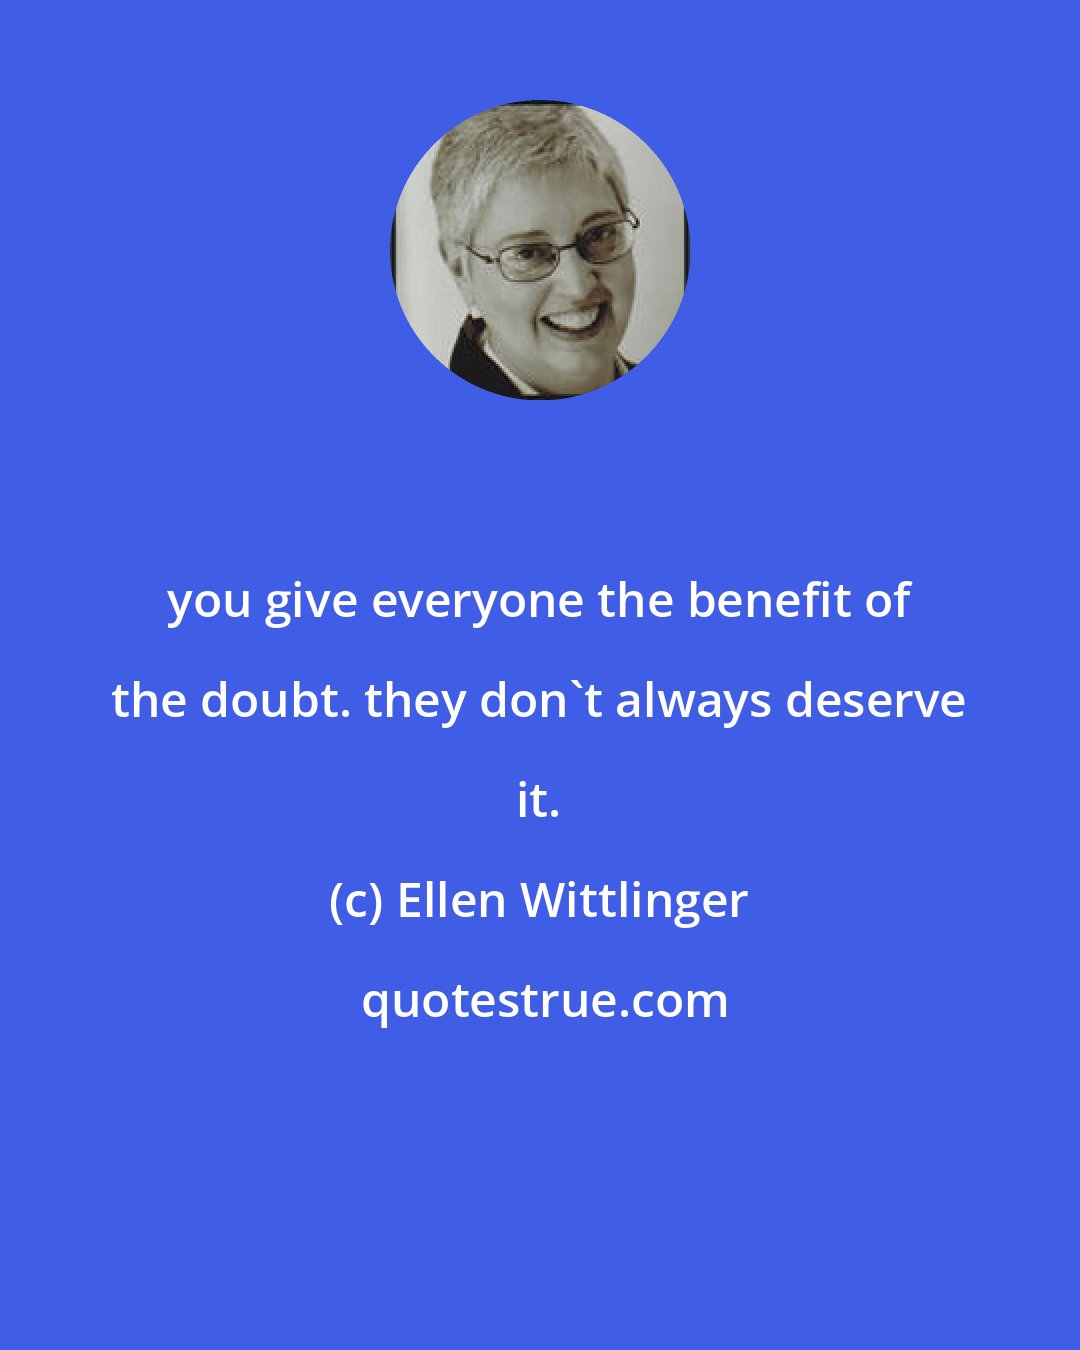 Ellen Wittlinger: you give everyone the benefit of the doubt. they don't always deserve it.